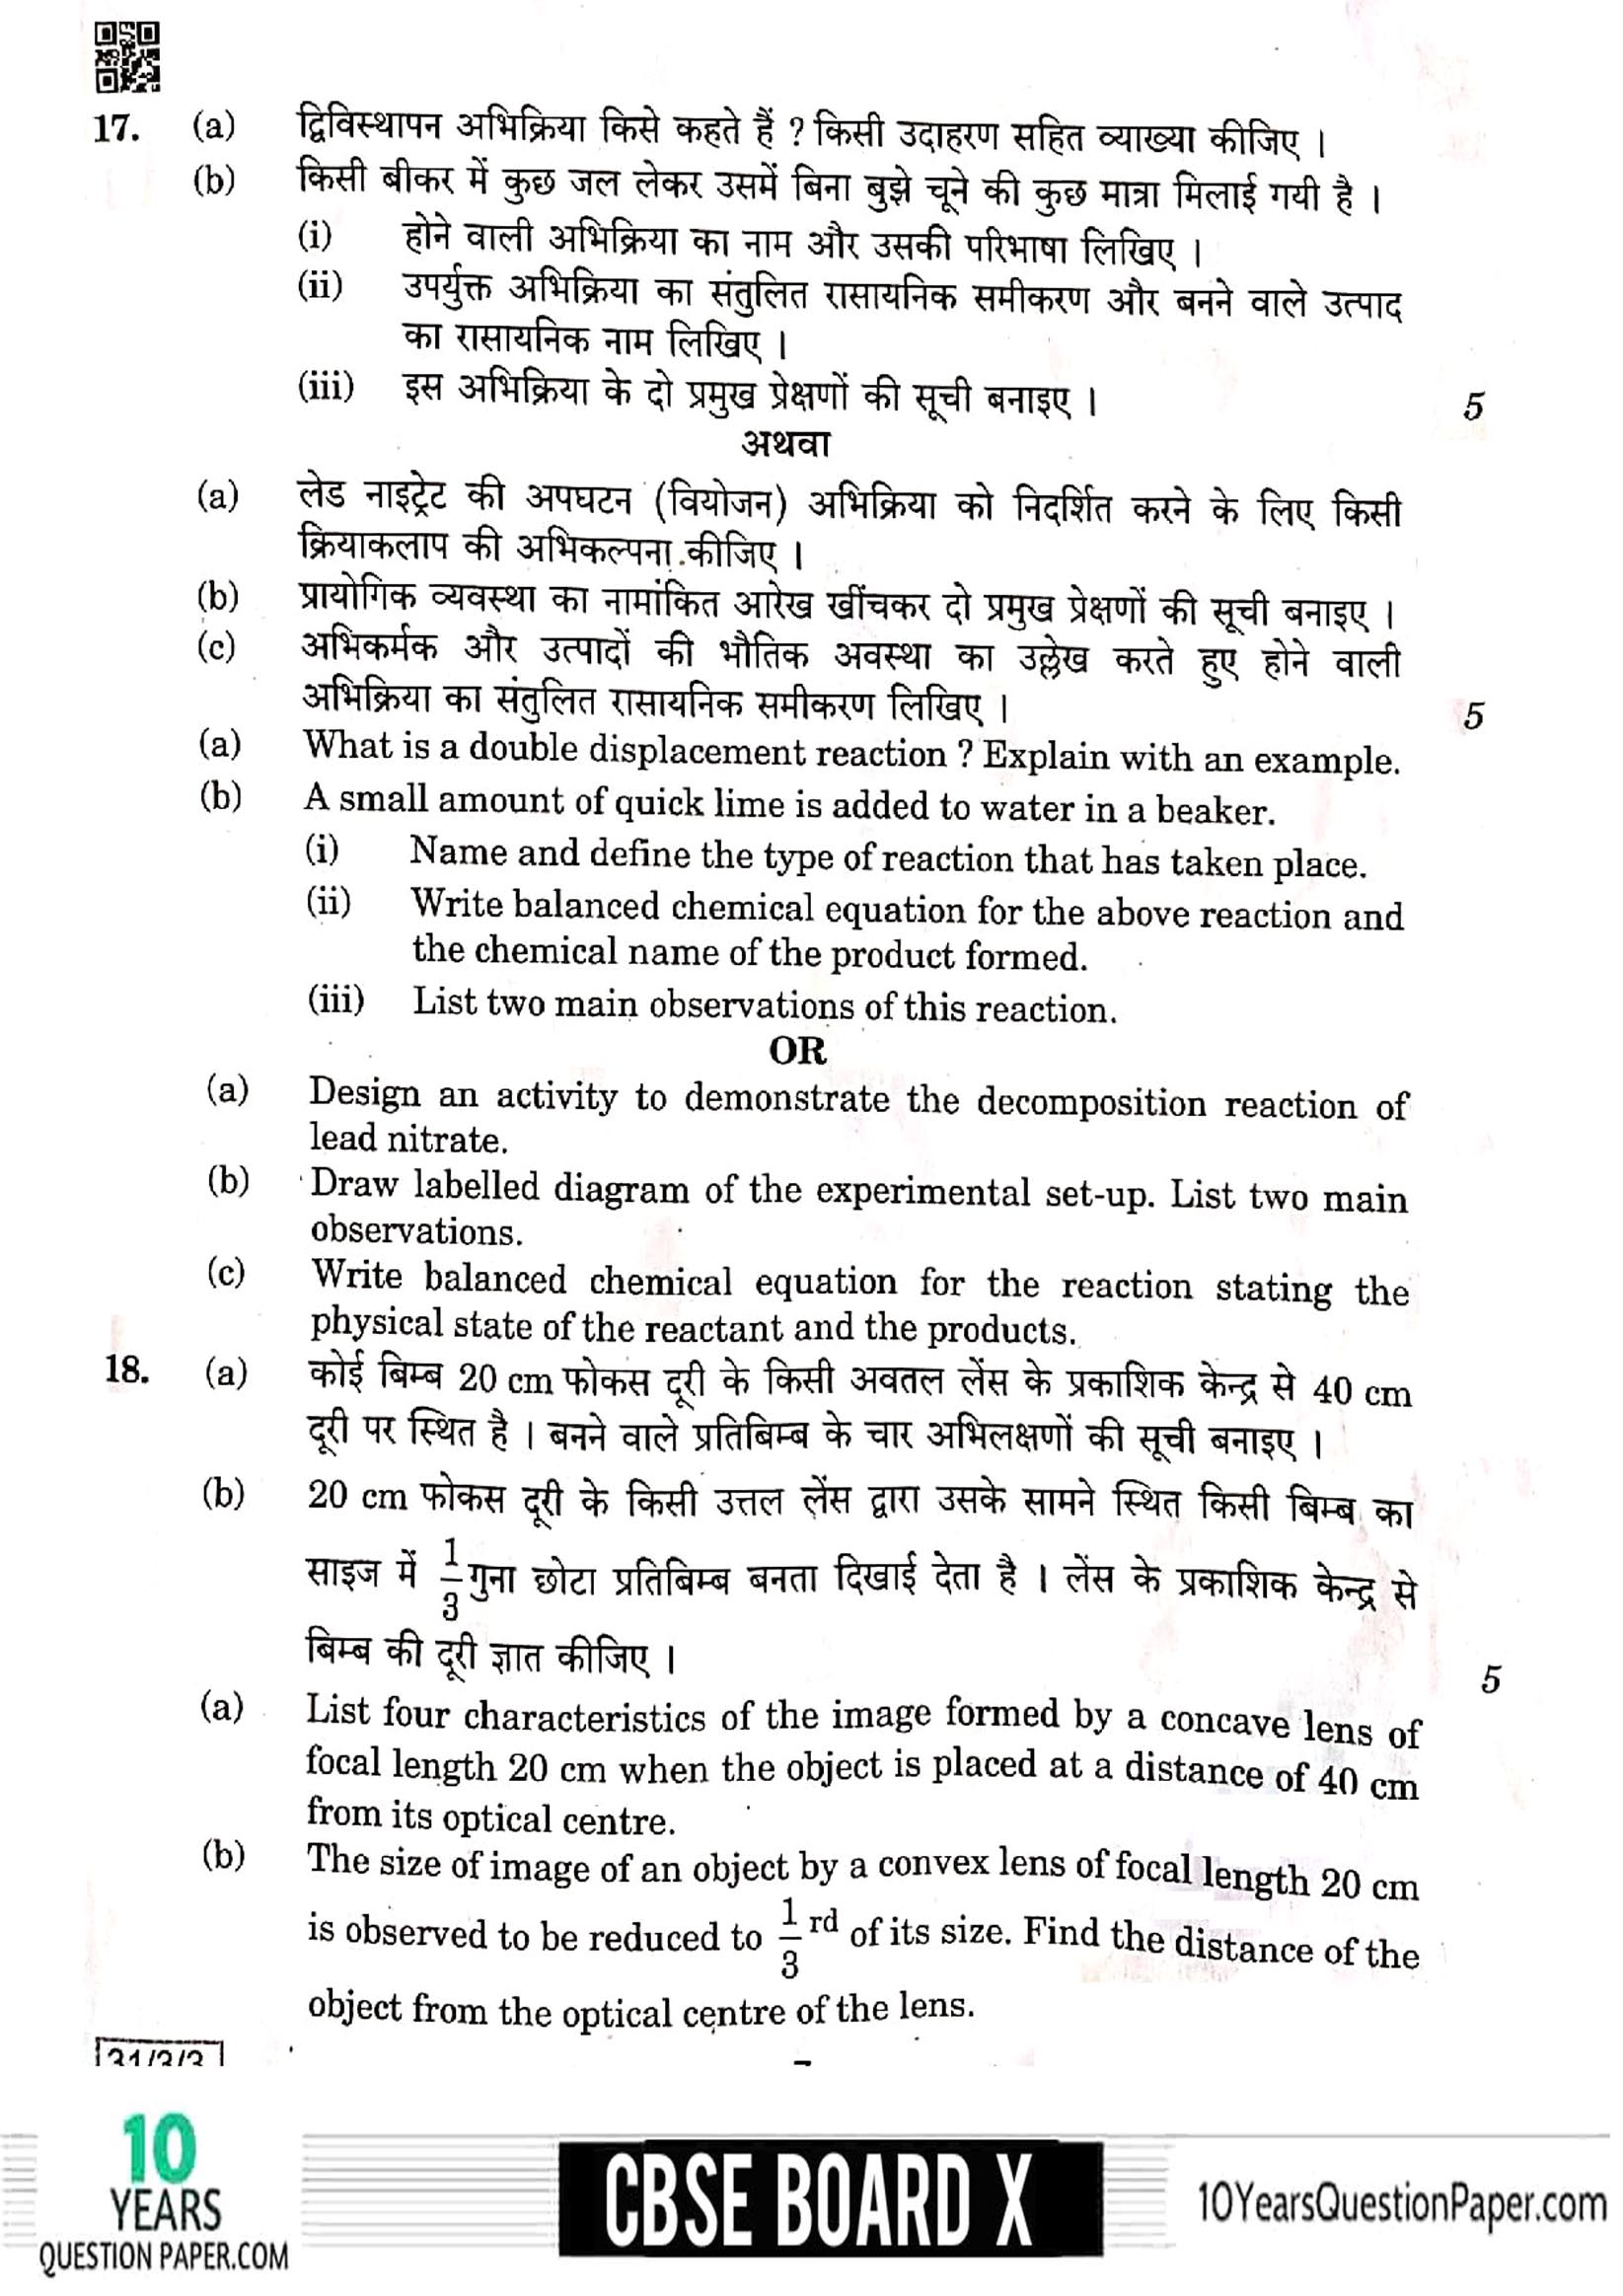 CBSE 2019 Science Question Paper for Class 10